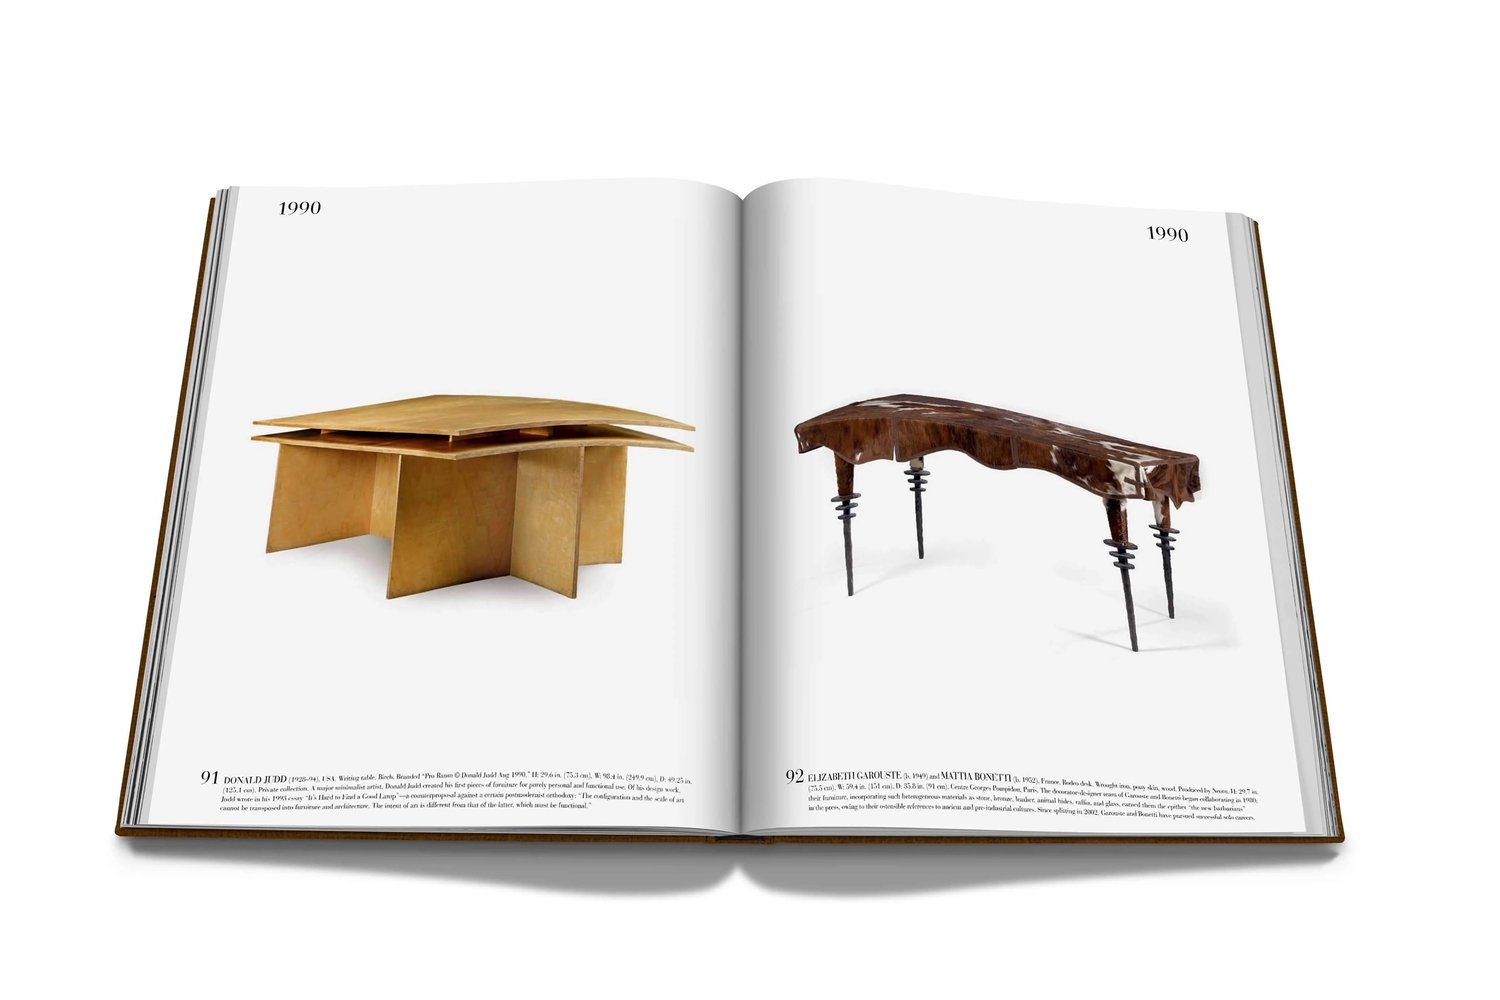 Buy Assouline 'Louis Vuitton Skin: Architecture of Luxury' Book - Seoul  Edition